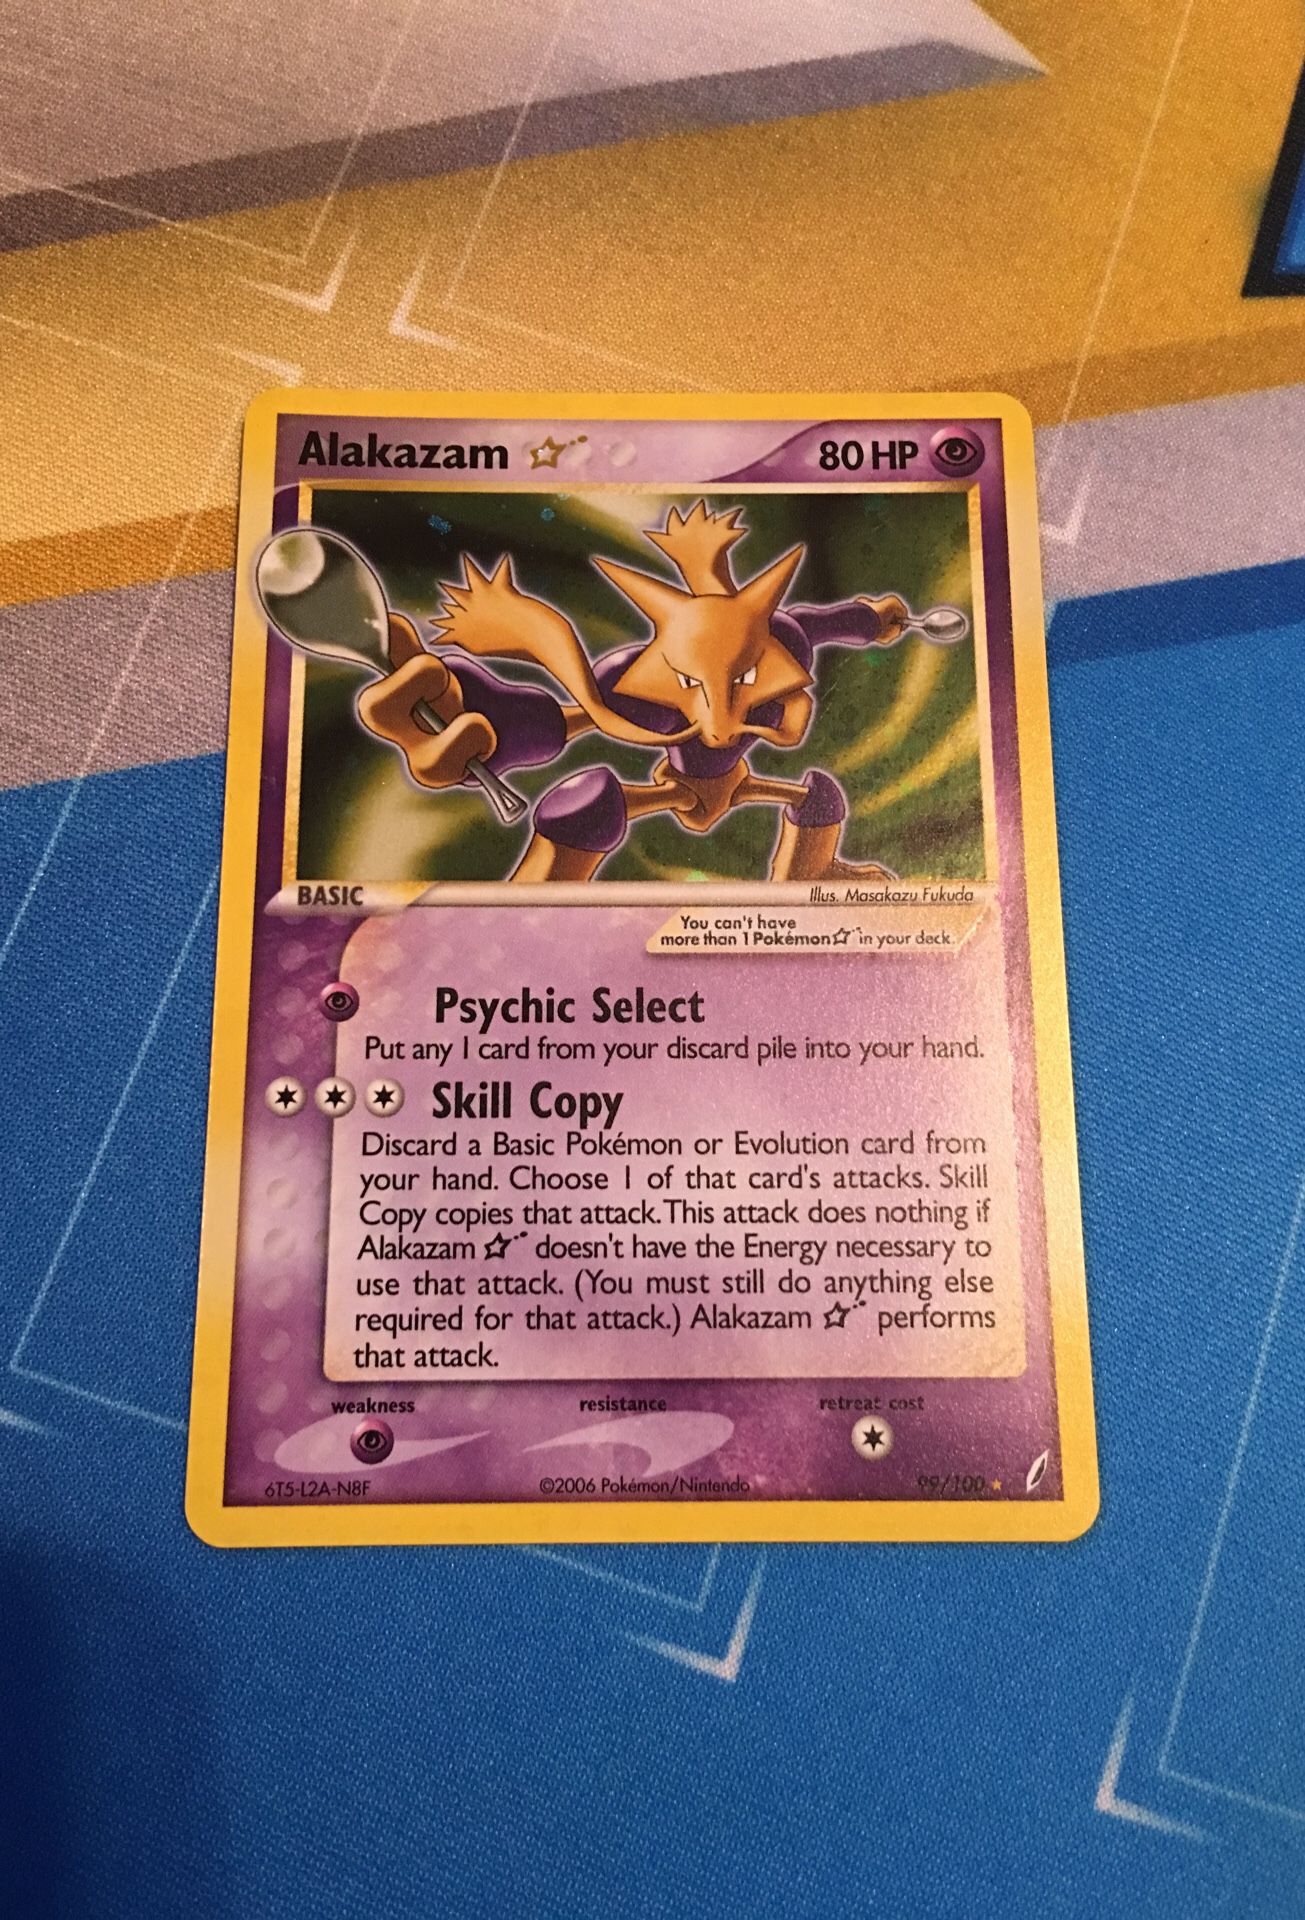 Pokemon Celebrations 25th Anniversary Mew Gold Card for Sale in Seattle, WA  - OfferUp